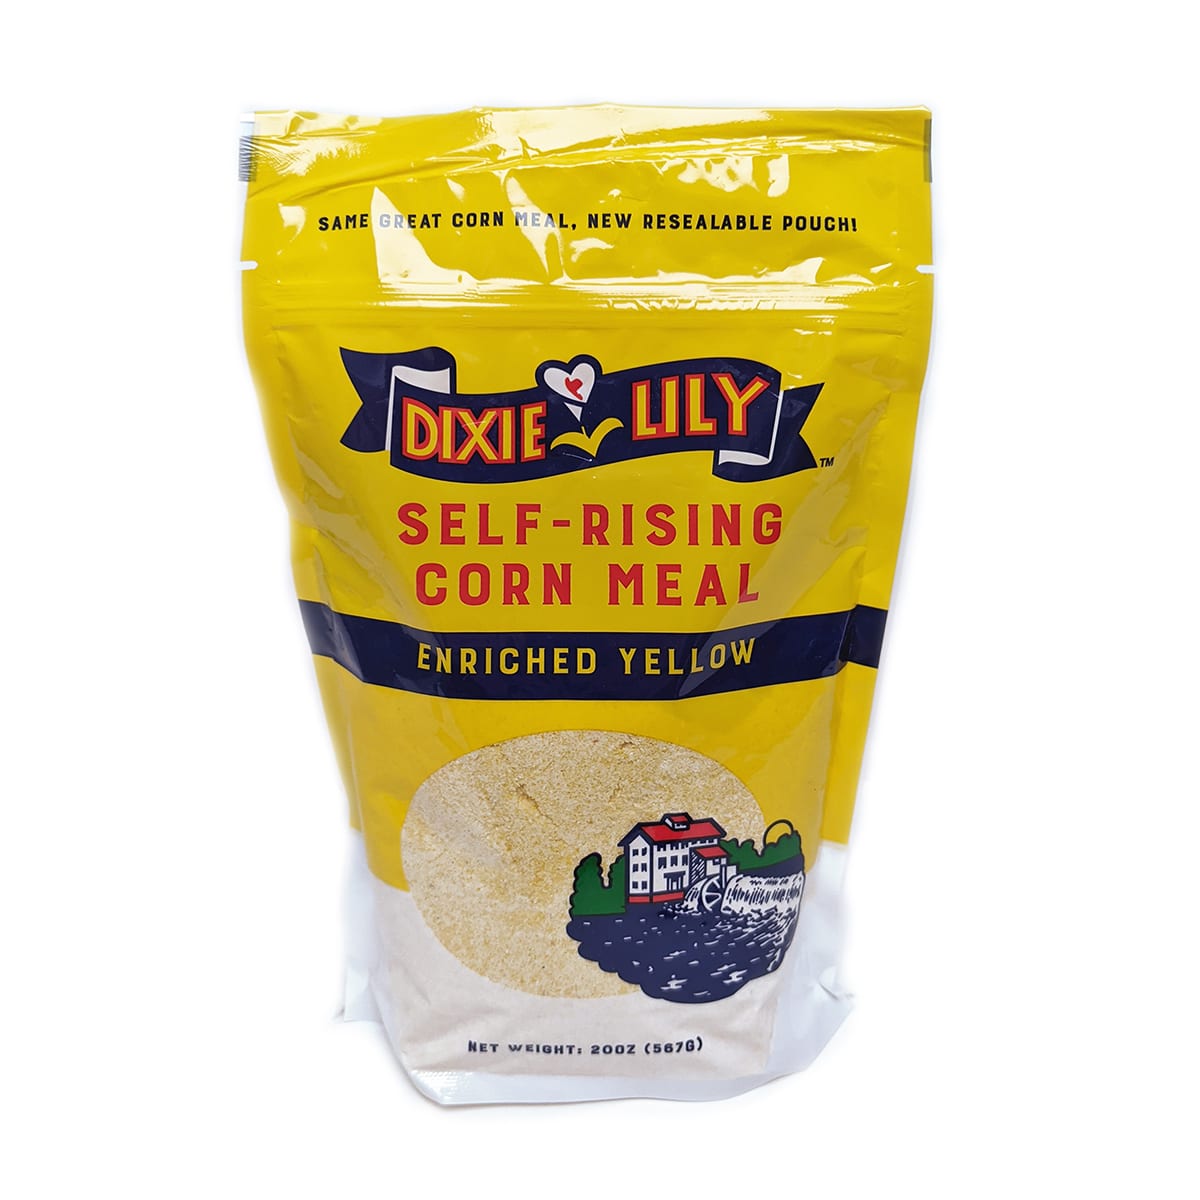 Dixie Lily Self Rising Corn Meal Enriched Yellow 20oz